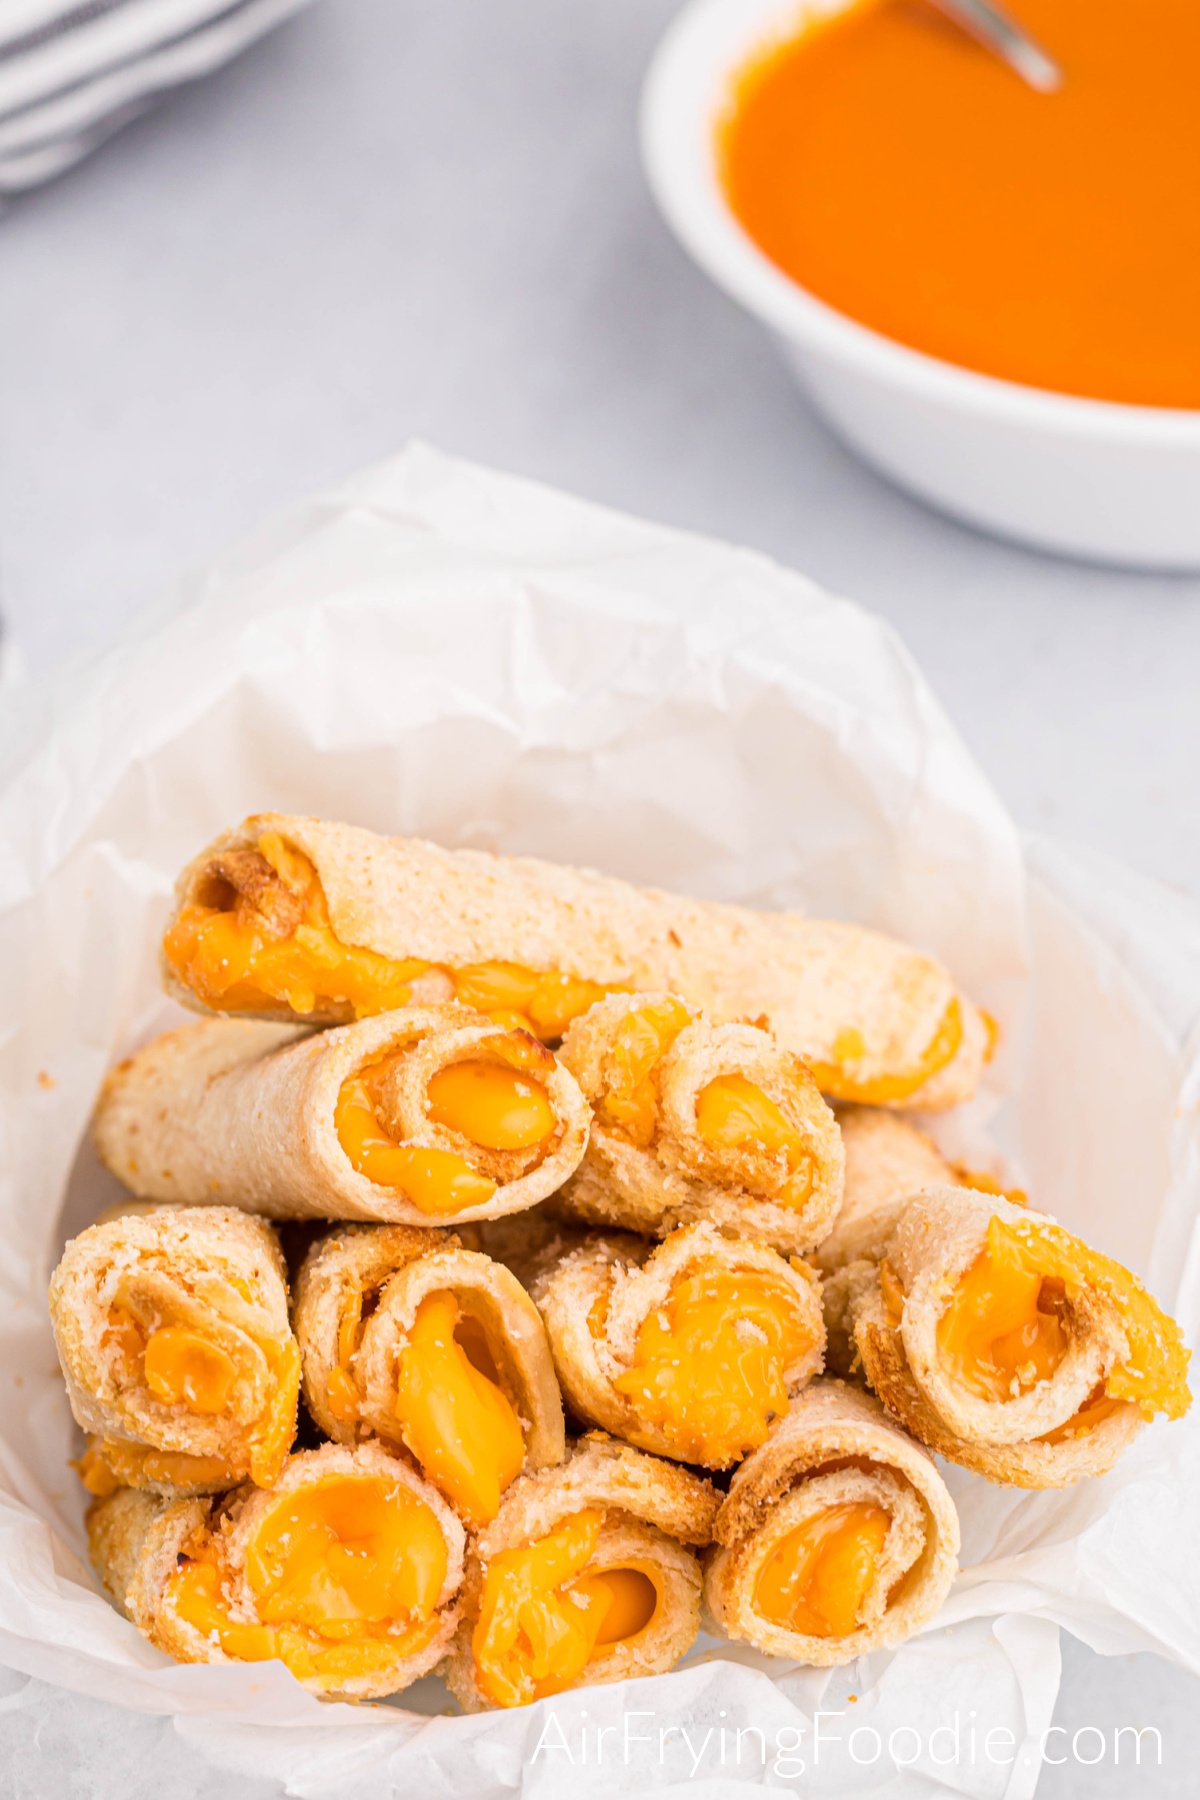 Grilled cheese roll ups cooked in the air fryer and ready to serve with a side of tomato soup.